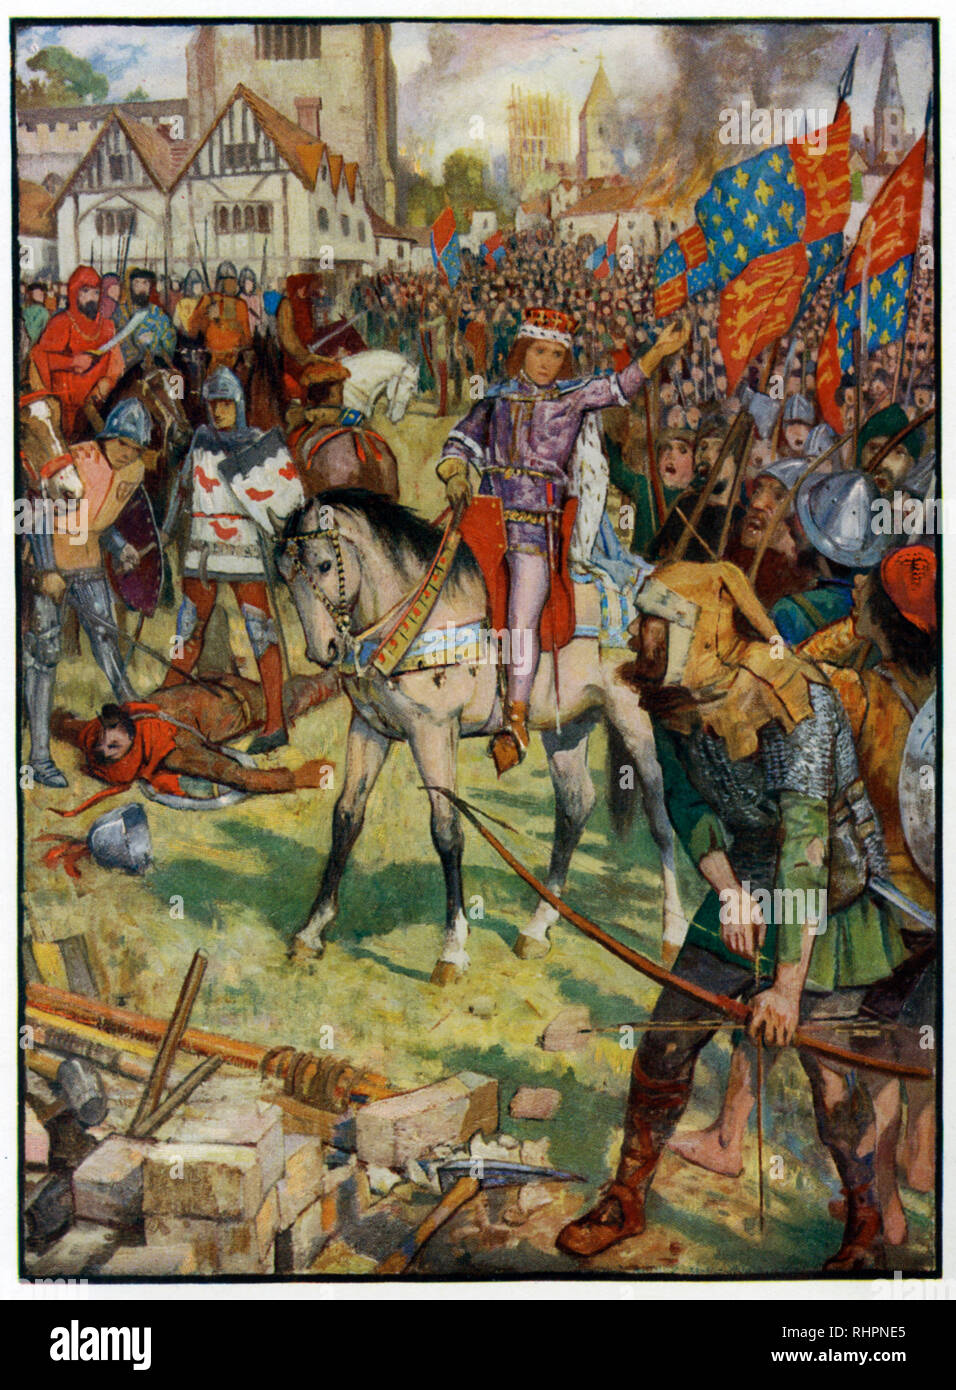 Richard II and Wat Tyler. By Henry Justice Ford (1860-1941). Walter 'Wat' Tyler (d1381) was a leader of the 1381 Peasants' Revolt in England. He marched with rebels from Canterbury to London to oppose the institution of a poll tax and demand economic and social reforms. Tyler was killed by officers loyal to King Richard II during negotiations at Smithfield, London. Stock Photo